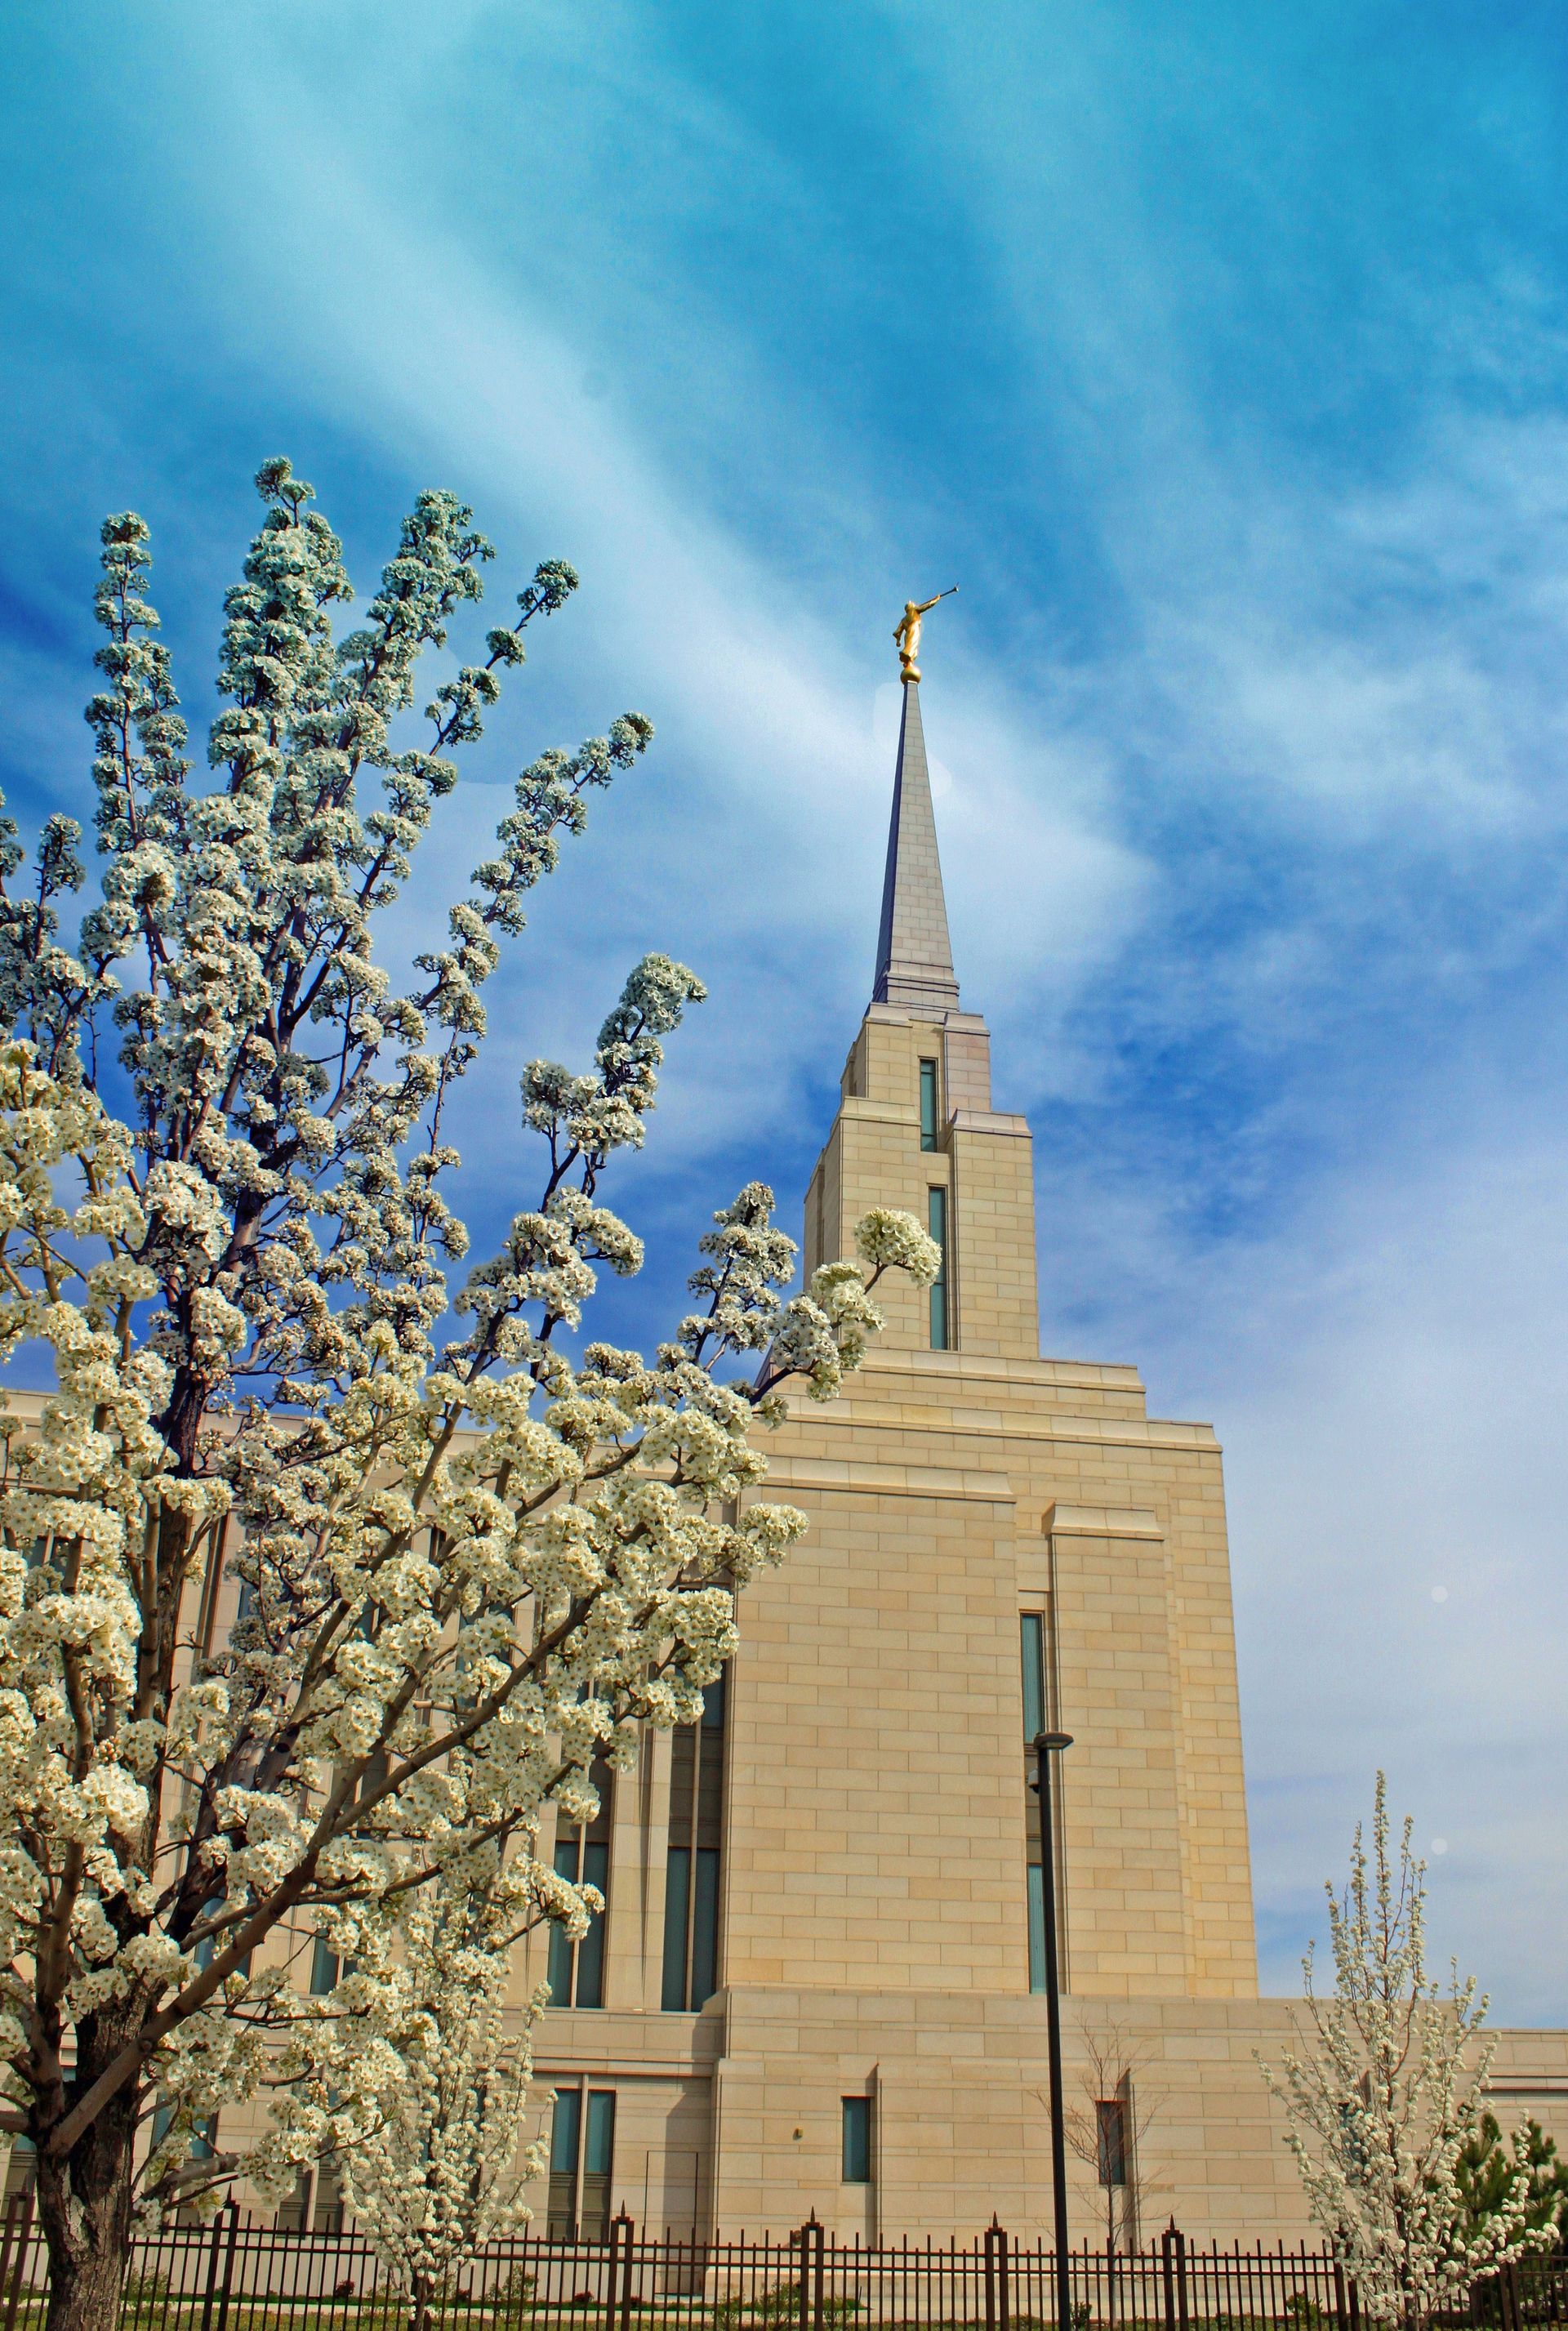 The Oquirrh Mountain Utah Temple spire, including scenery.